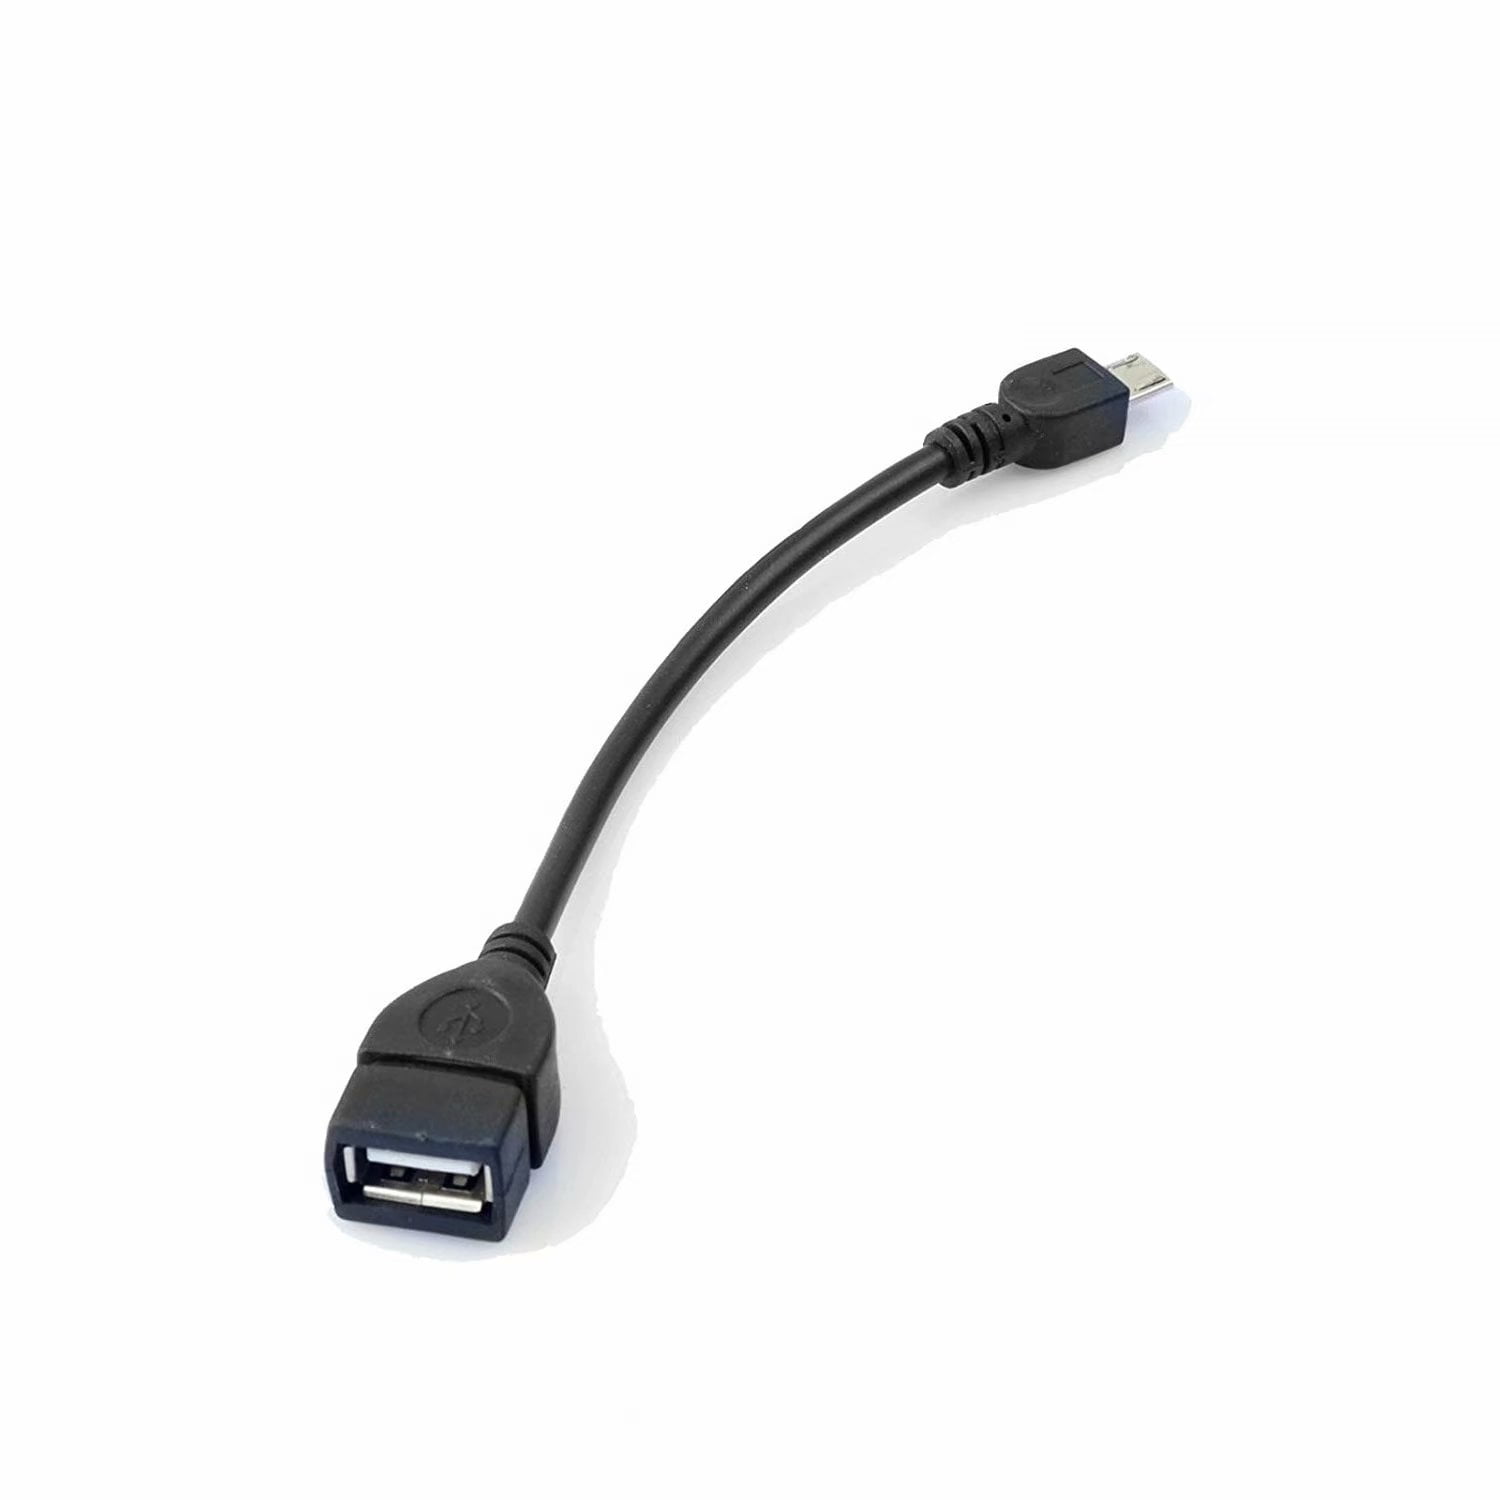 gås auditorium at opfinde Mini USB OTG Cable for Digital Cameras - USB A Female to Mini USB B 5 Pin  Male Adapter Cable（1 Pack) - Walmart.com